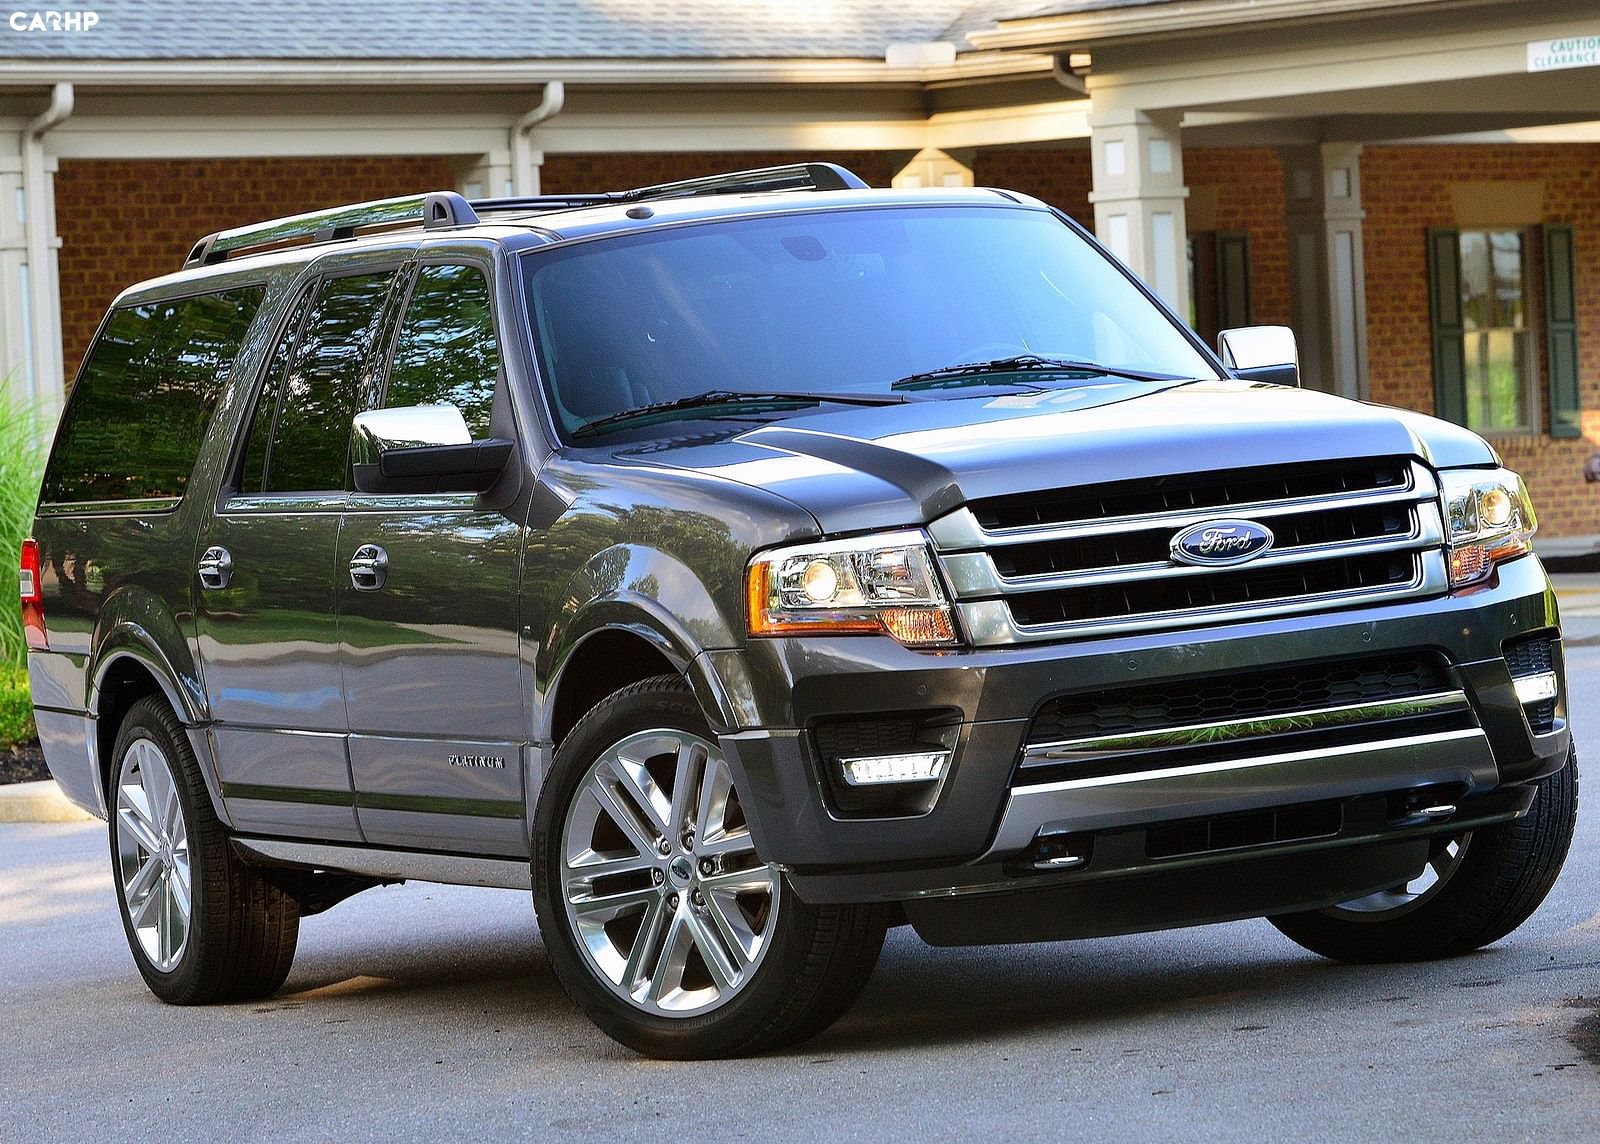 2016 Ford Expedition Dimensions, Ground Clearance and Wheelbase | CARHP